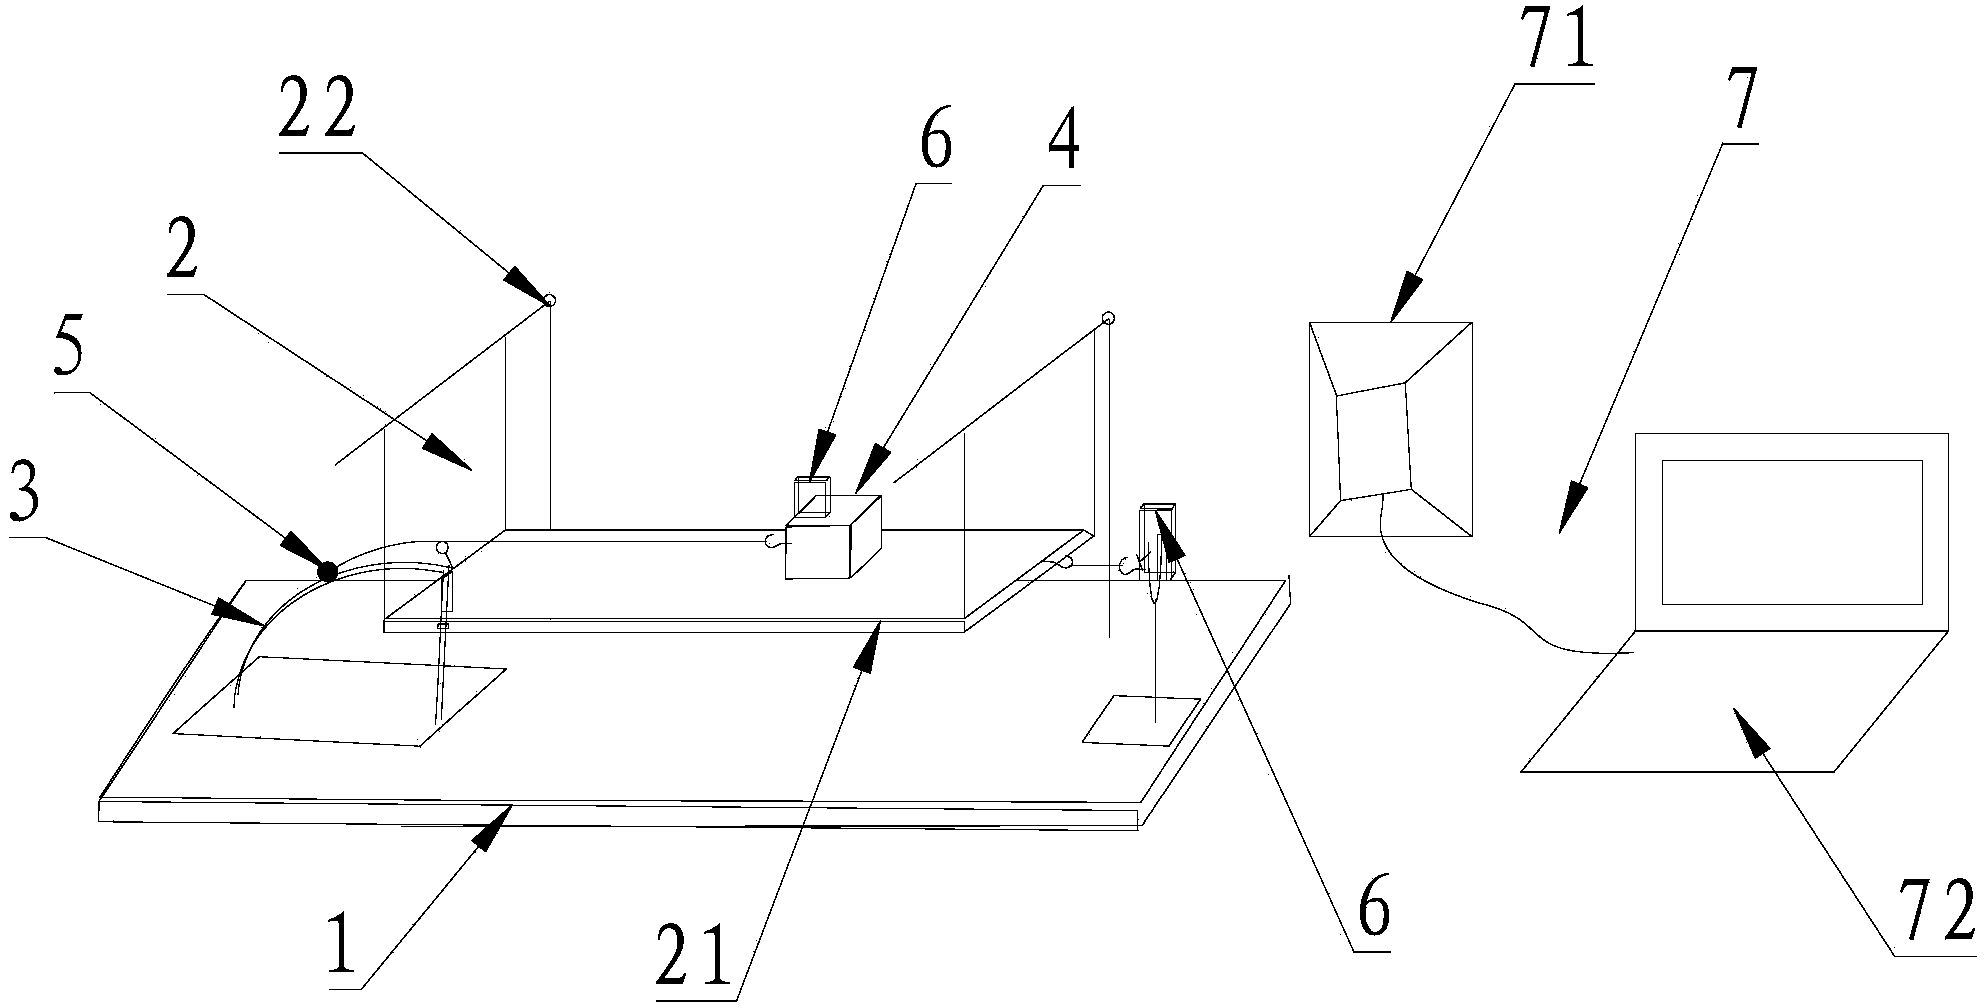 Experiment demonstration device for measuring relation between friction force and tensile force